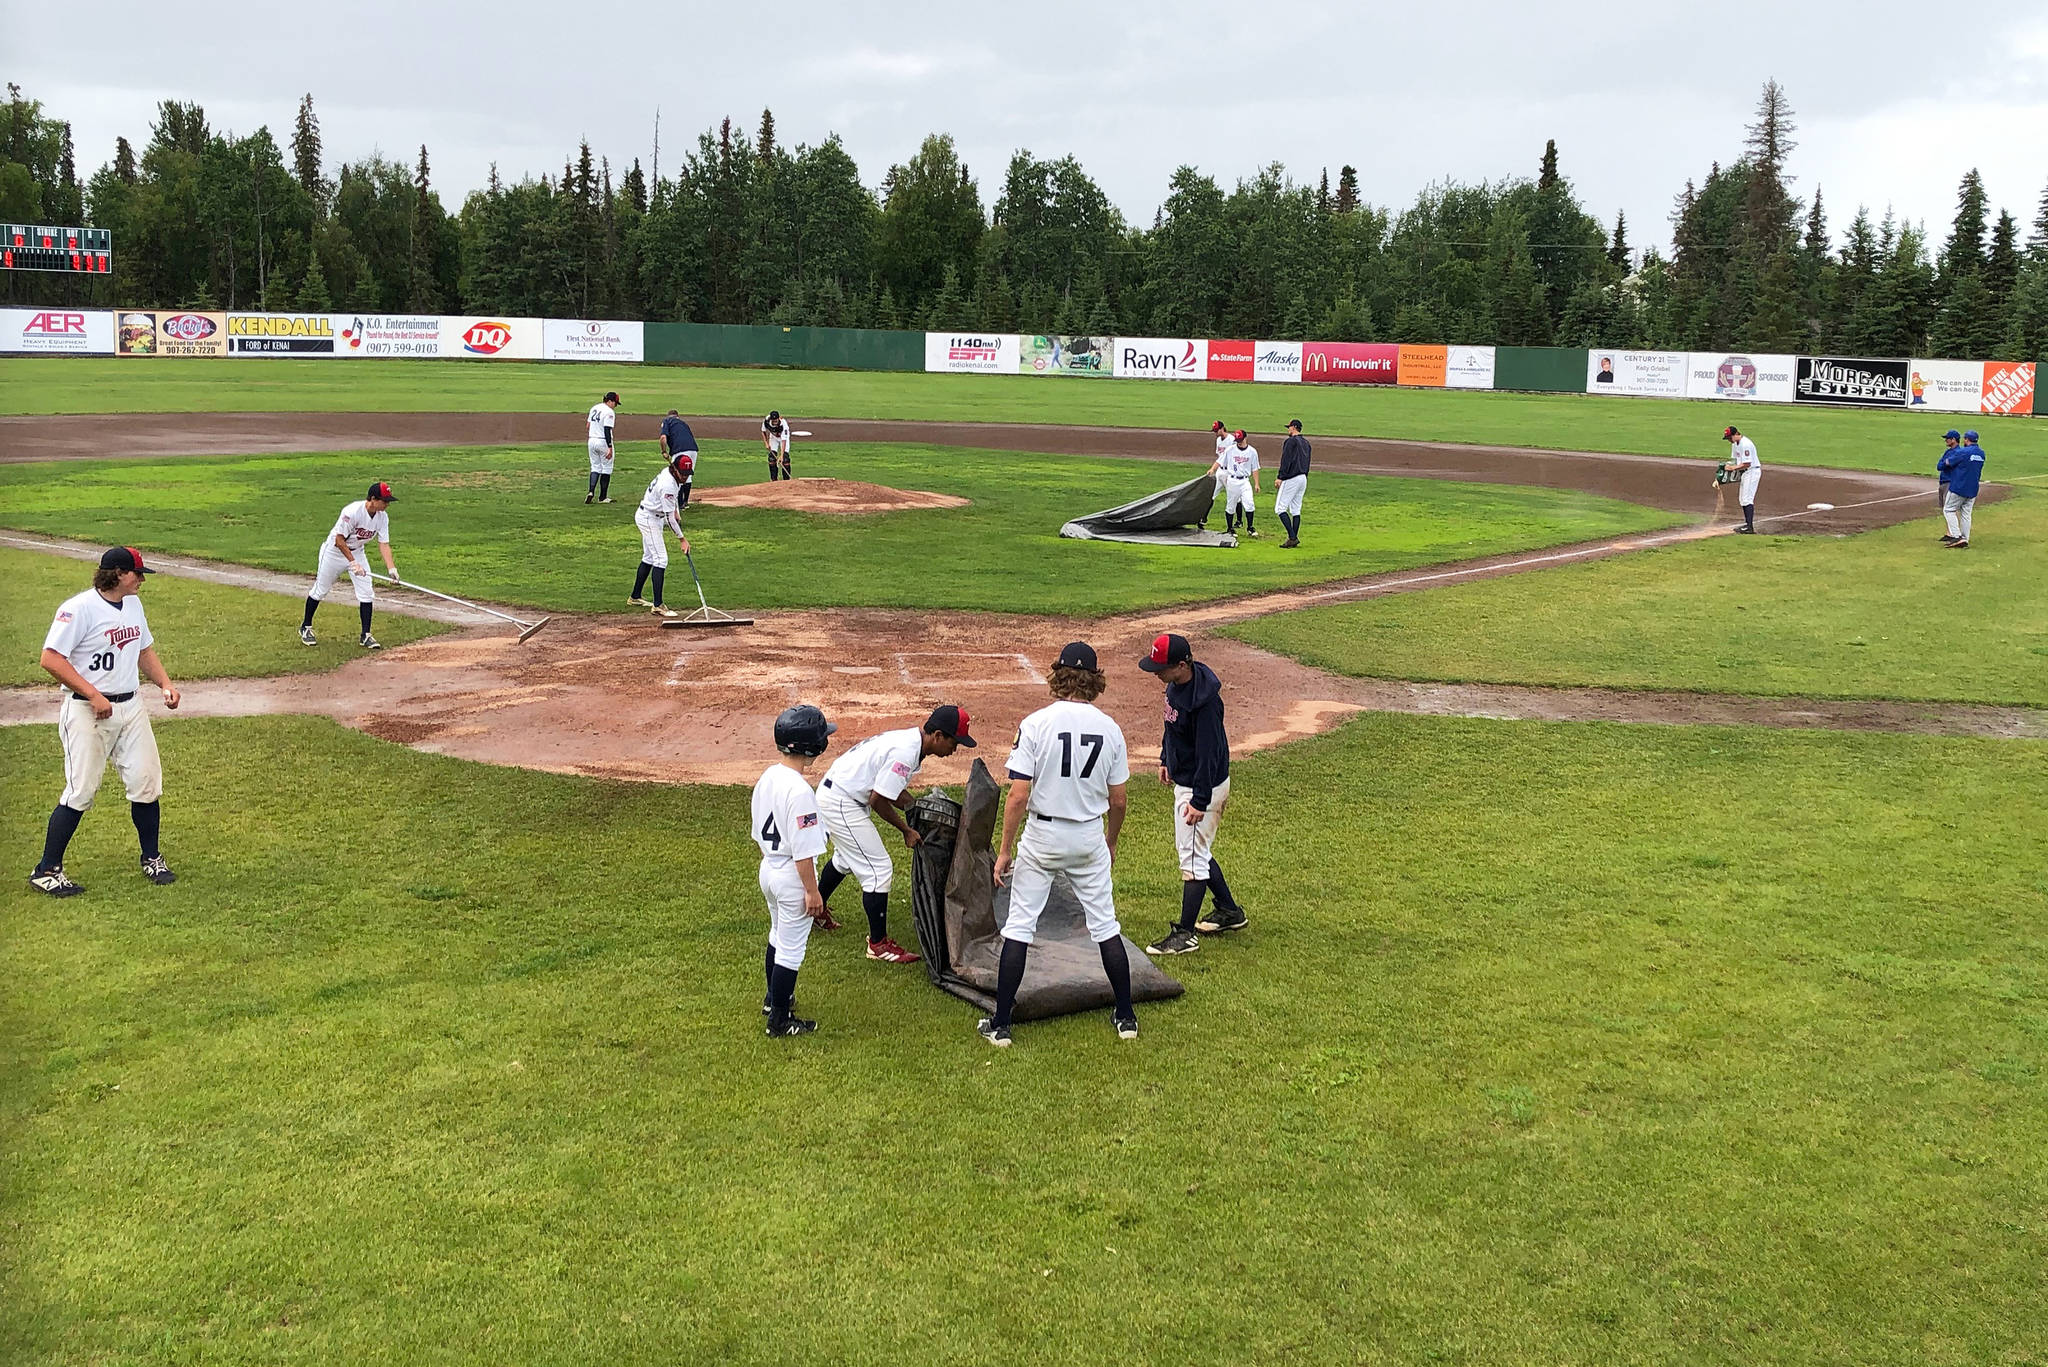 Members of the Legion Twins work to dry the infield after a brief shower Tuesday, July 16, 2019, at Coral Seymour Memorial Park in Kenai, Alaska. (Photo by Joey Klecka/Peninsula Clarion)